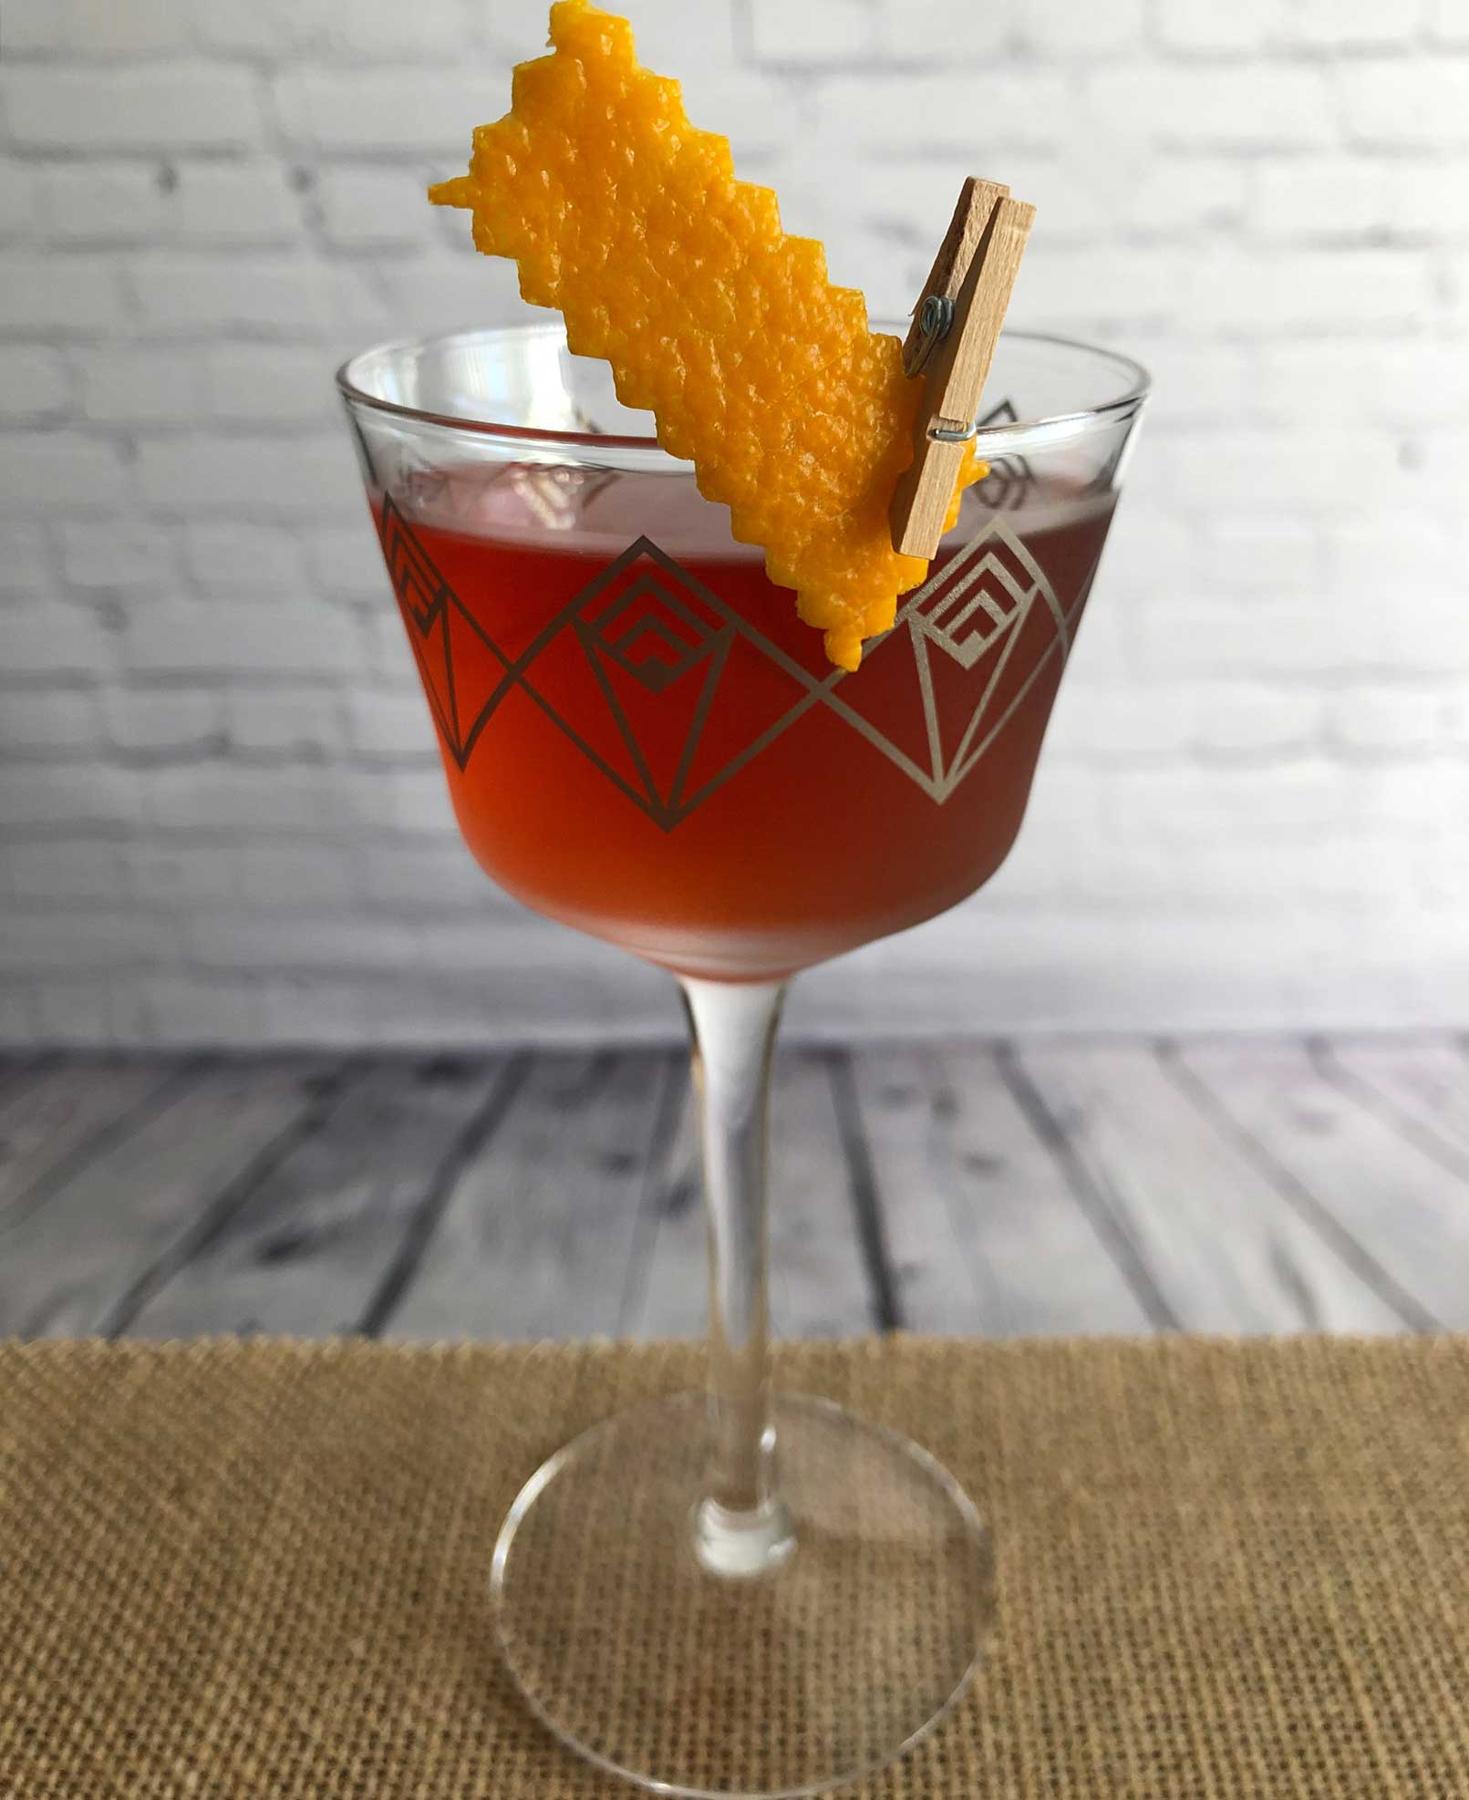 An example of the Byrrh Martinez, the mixed drink (drink) featuring Hayman’s Old Tom Gin, Byrrh Grand Quinquina, maraschino liqueur, and orange twist; photo by Lee Edwards